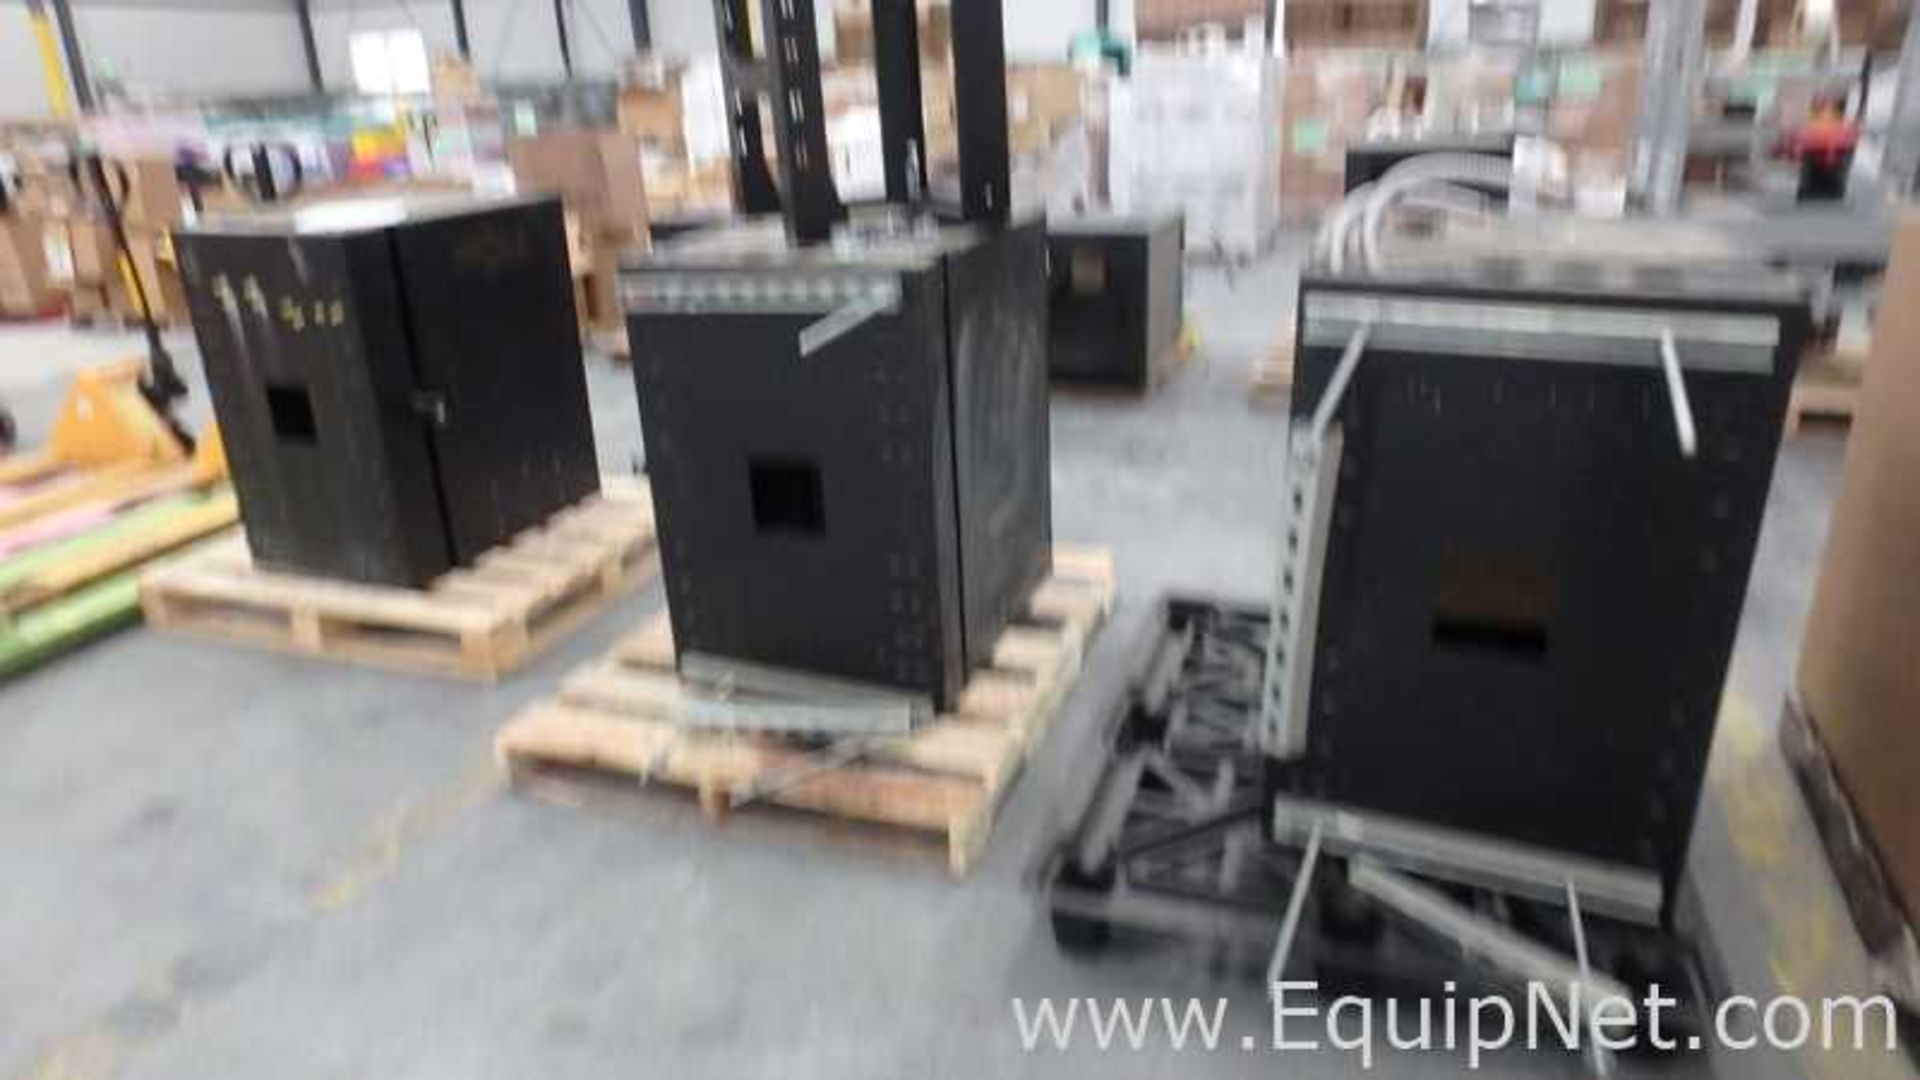 Lot of 3 Pallets With Server Box Stations - Image 5 of 6